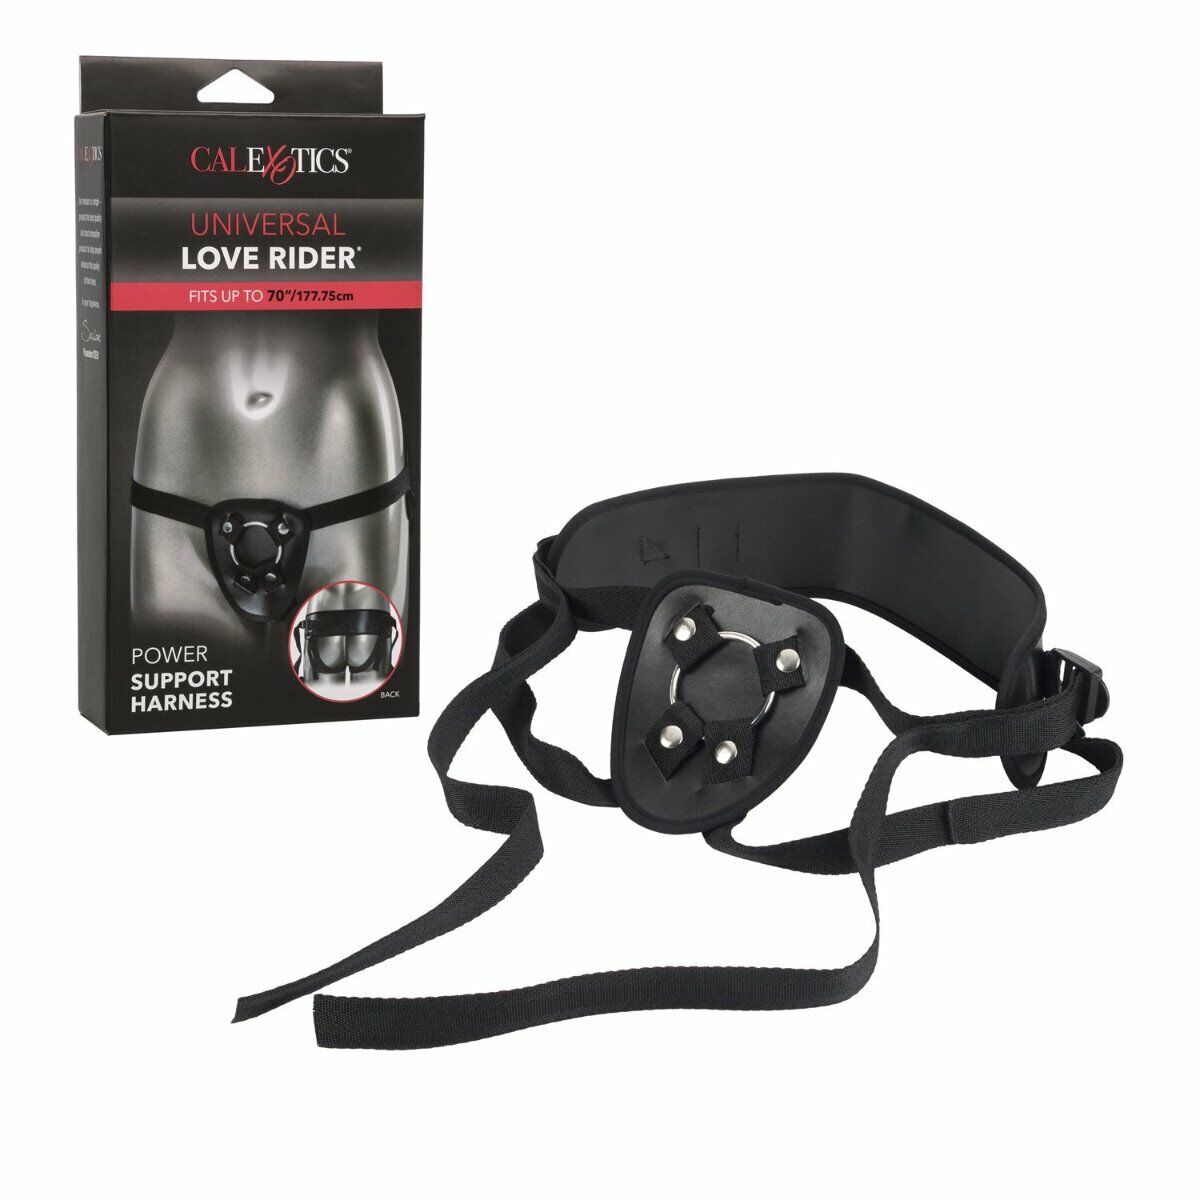 Universal Love Rider Power Support Harness + O-ring Beginner Strap-on Accessory